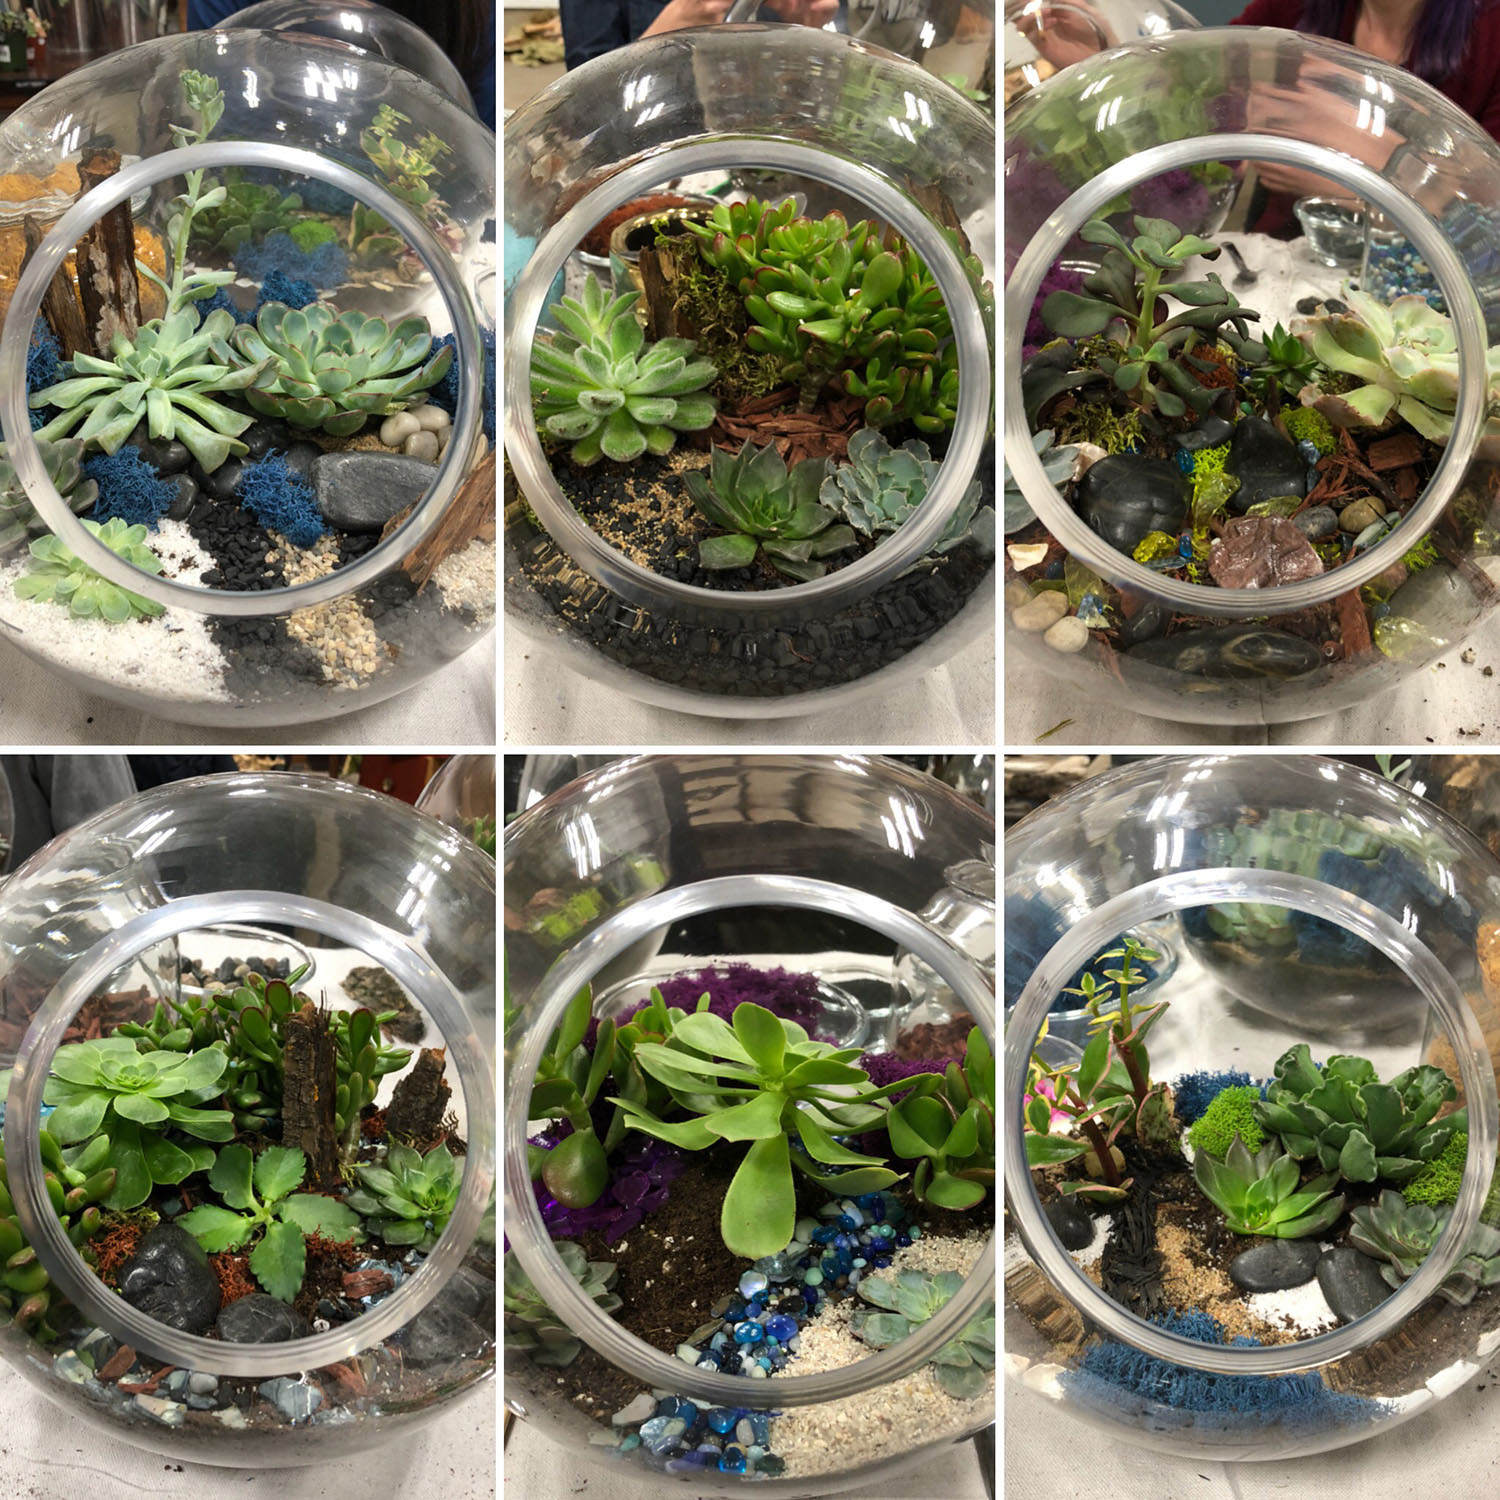 Six terrariums built by the Kick Point team are shown in a grid, three on top, three on the bottom.